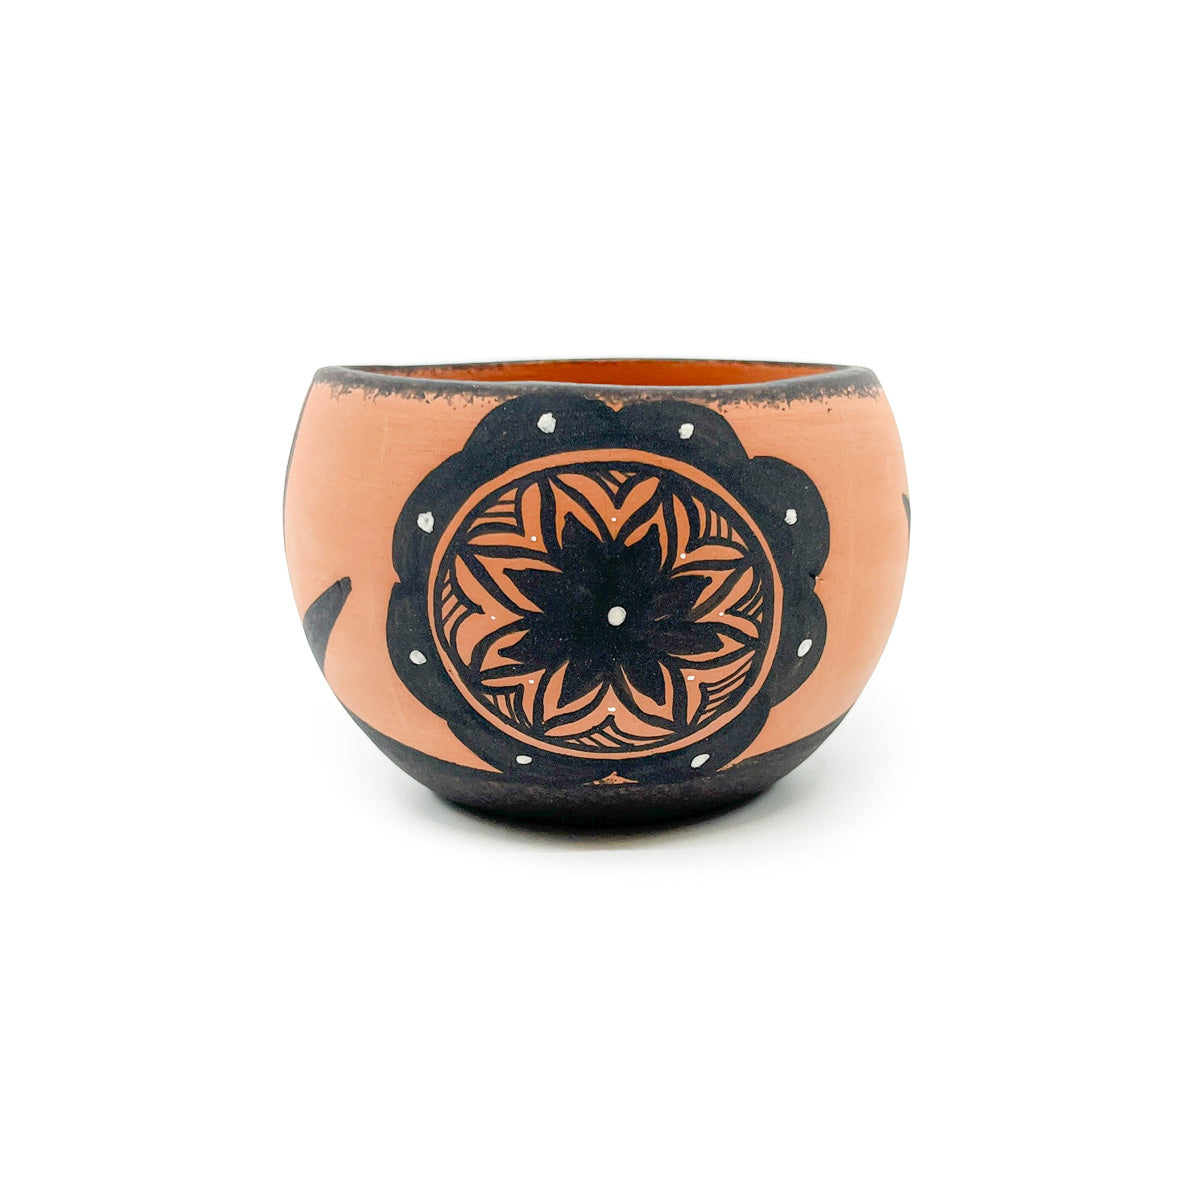 Load image into Gallery viewer, Small Zuni Bowl by Darla Westika
